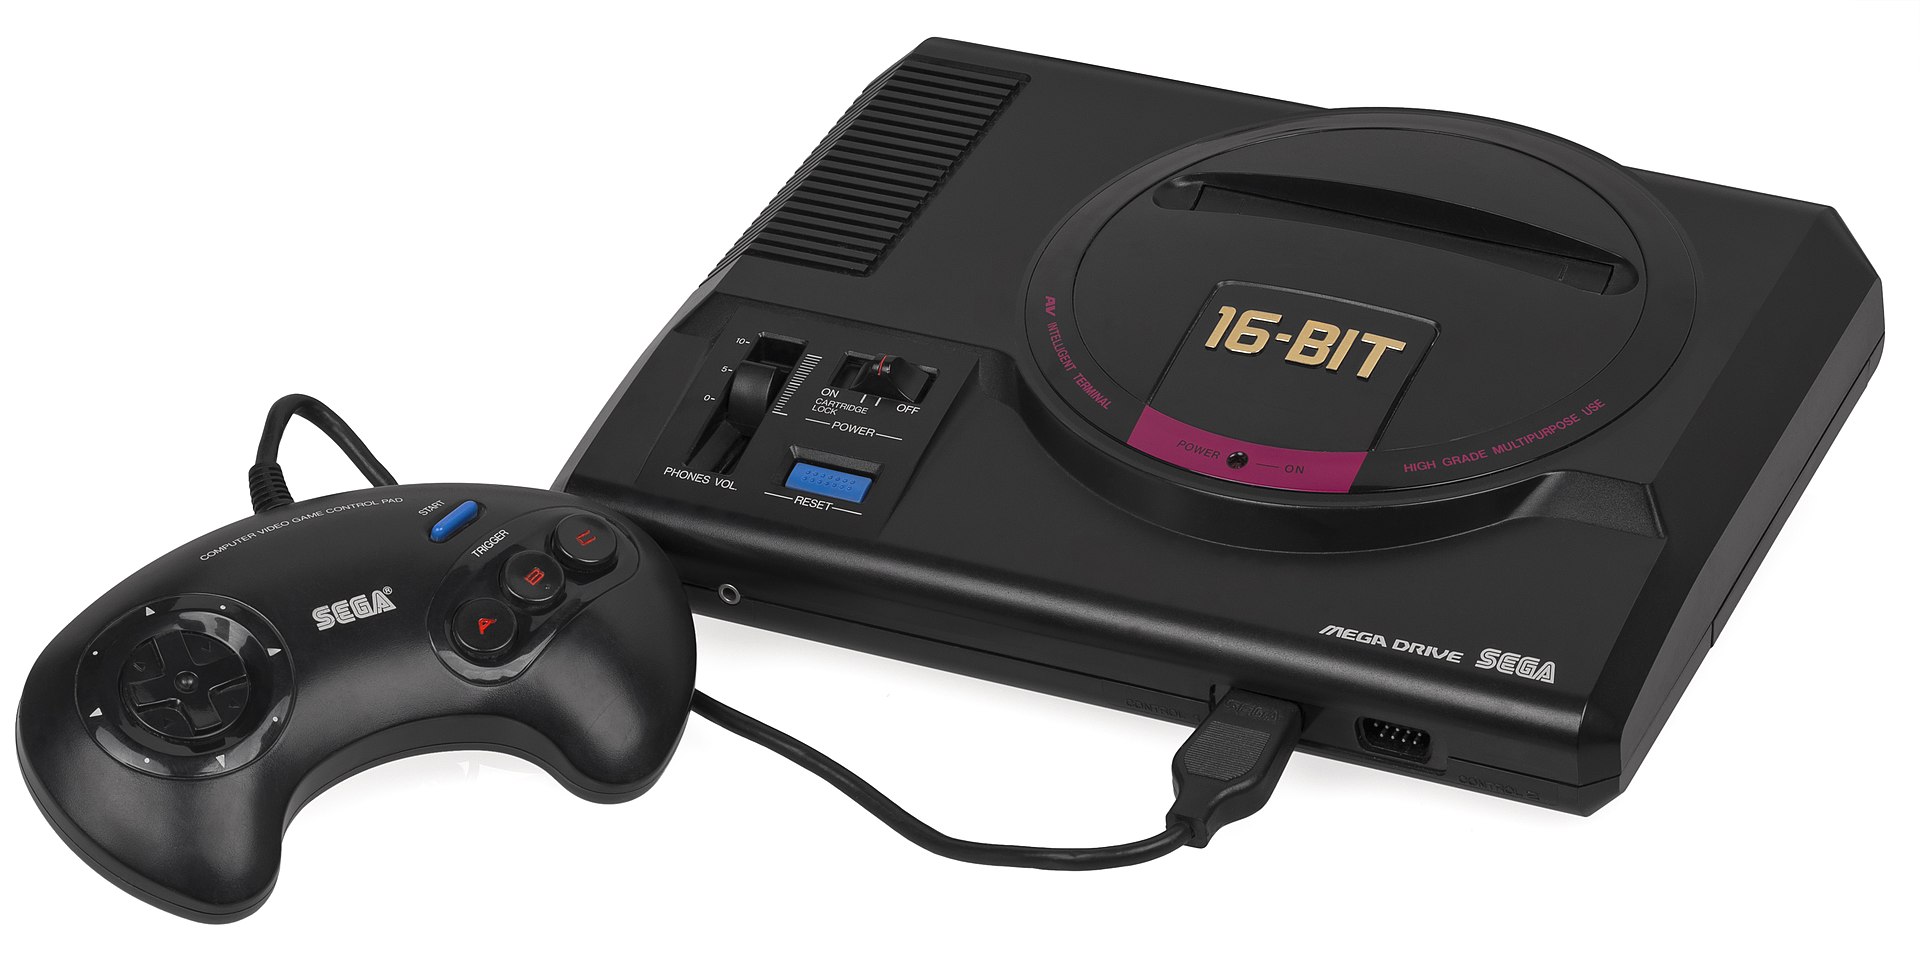 After the ST, Alexis started working in the game console world. He loved the Sega Megadrive.